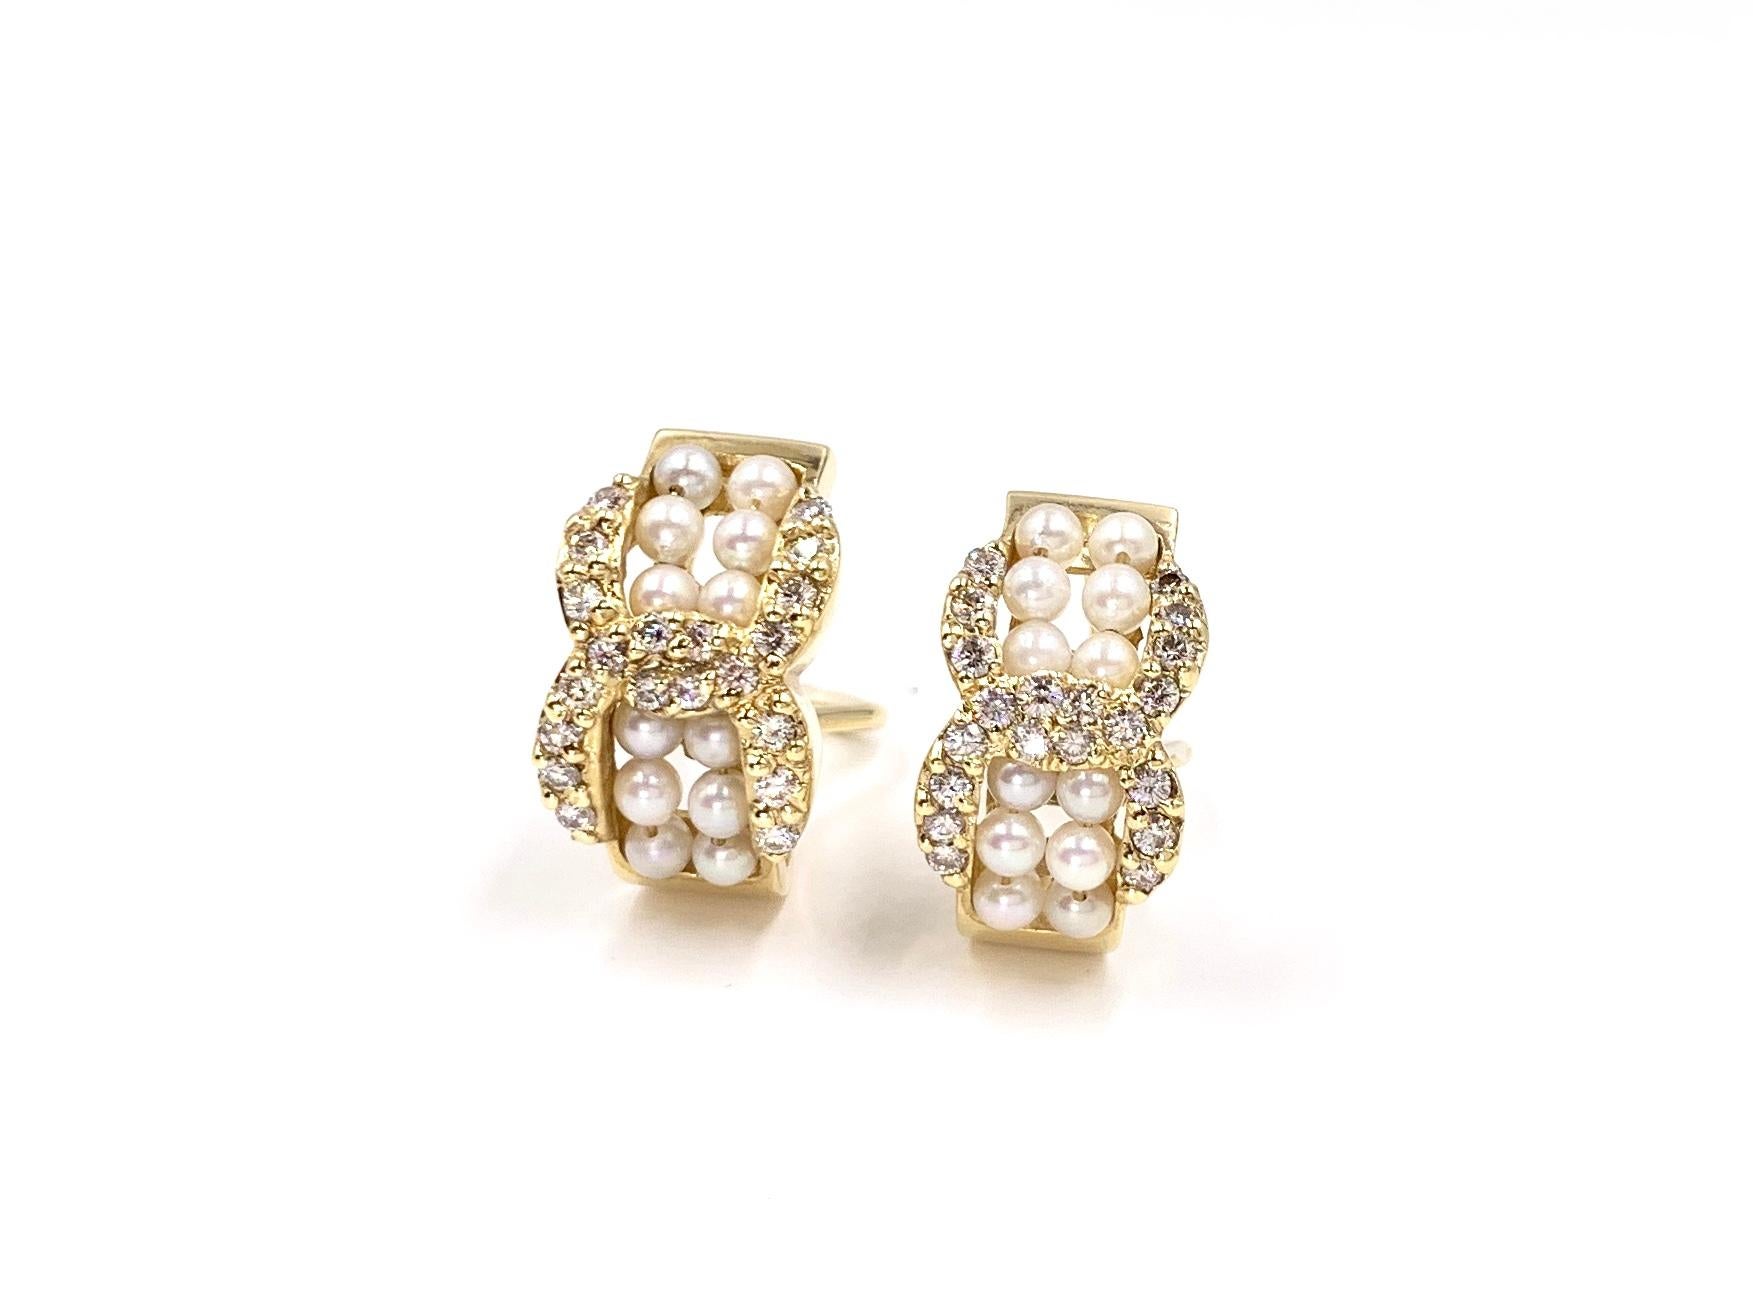 Wearable and timeless, these 14 karat yellow gold half hoop style earrings feature 14 lustrous white seed pearls in each earring with .81 carats total weight of round brilliant white diamonds, pavè set in an open link design. Earrings are fixed with